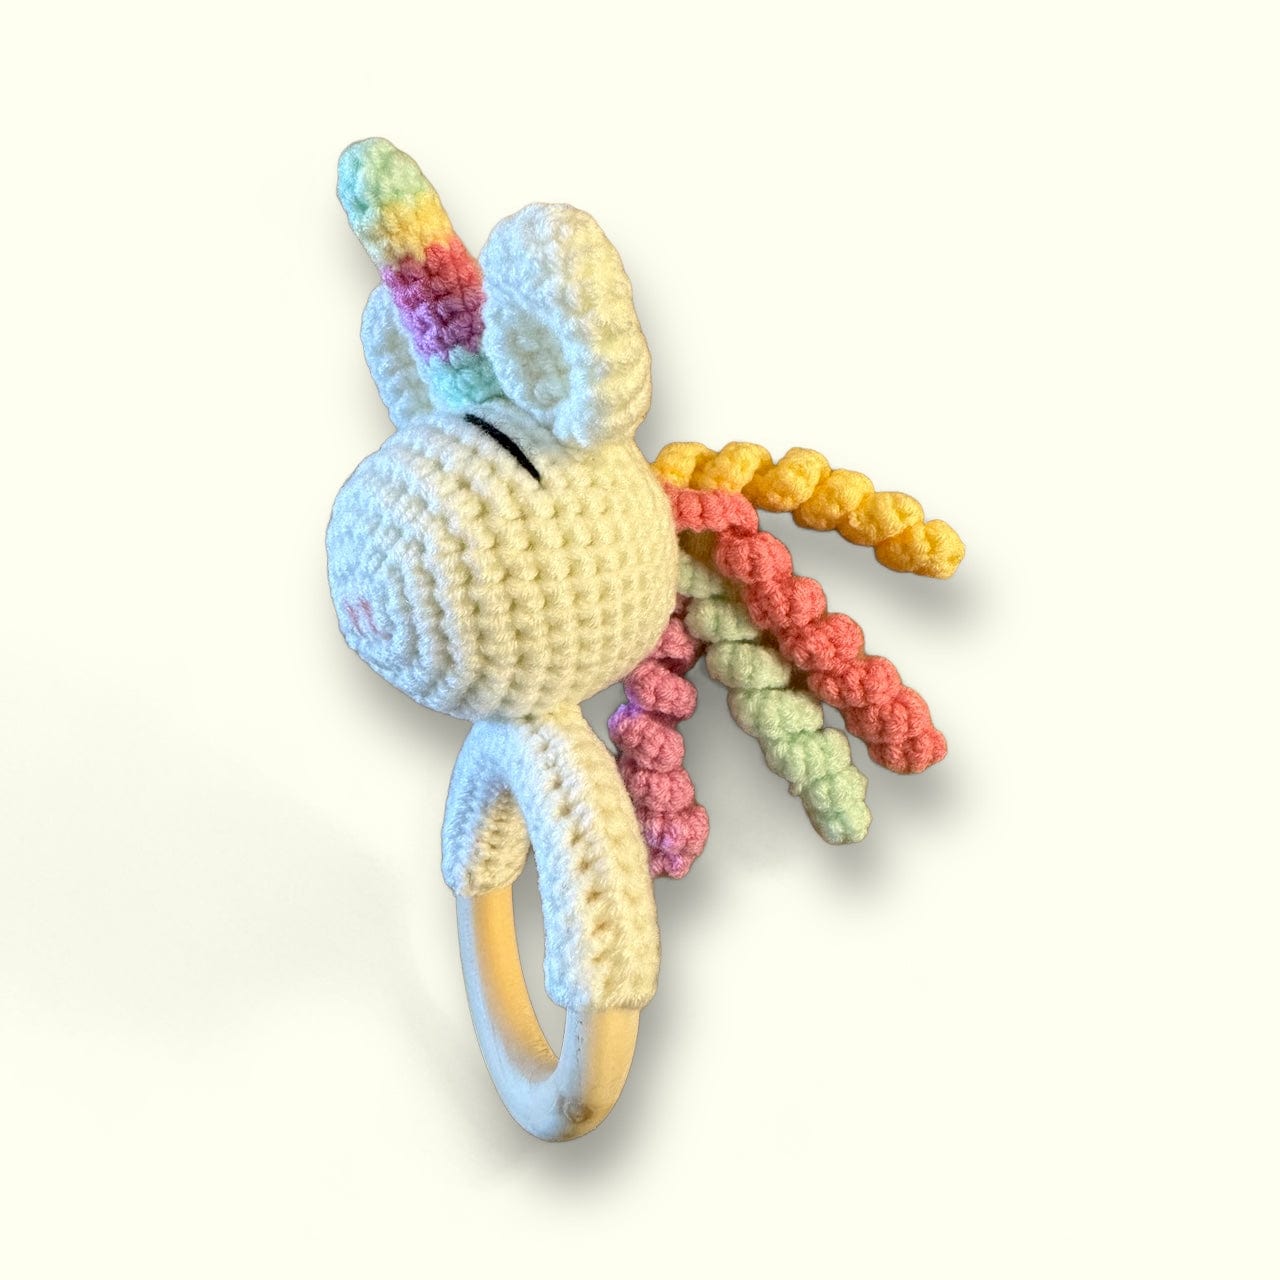 Best Day Ever Kids rattles Unicorn HAND CROCHET RATTLE buy online boutique kids clothing